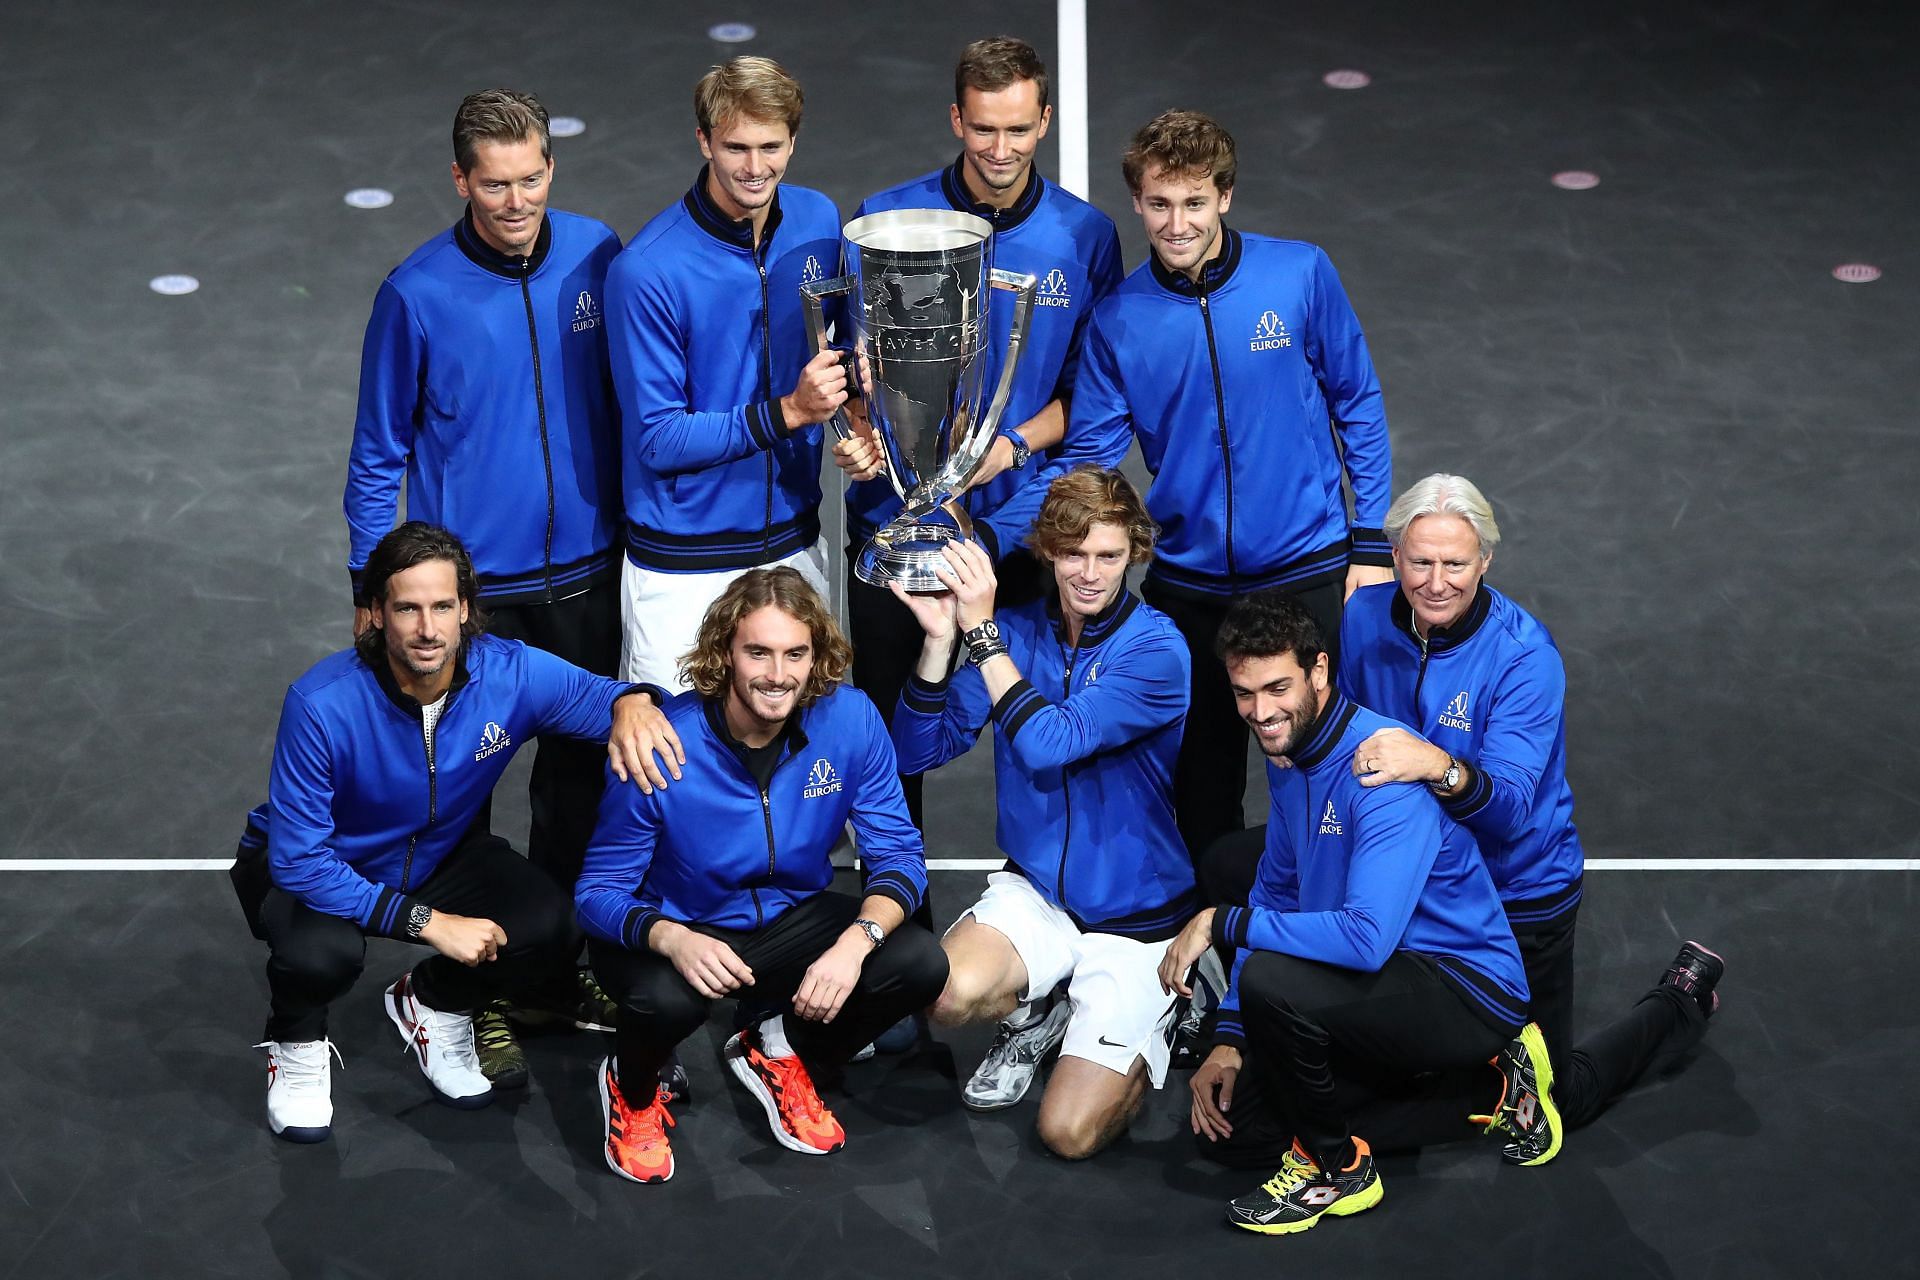 Stefanos Tsitsipas and Casper Ruud with their Team Europe teammates at Laver Cup 2021